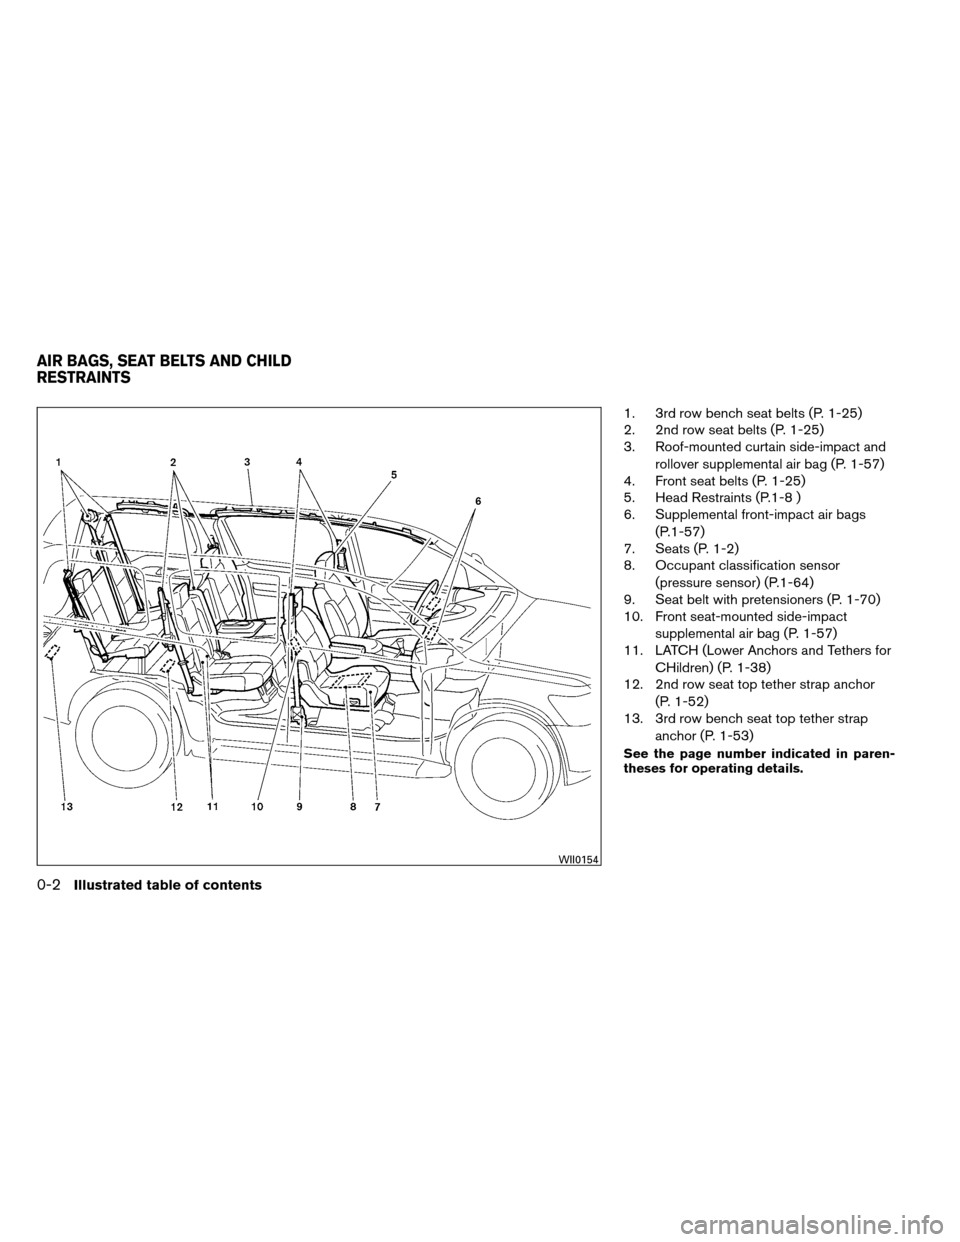 NISSAN ARMADA 2012 1.G User Guide 1. 3rd row bench seat belts (P. 1-25)
2. 2nd row seat belts (P. 1-25)
3. Roof-mounted curtain side-impact androllover supplemental air bag (P. 1-57)
4. Front seat belts (P. 1-25)
5. Head Restraints (P